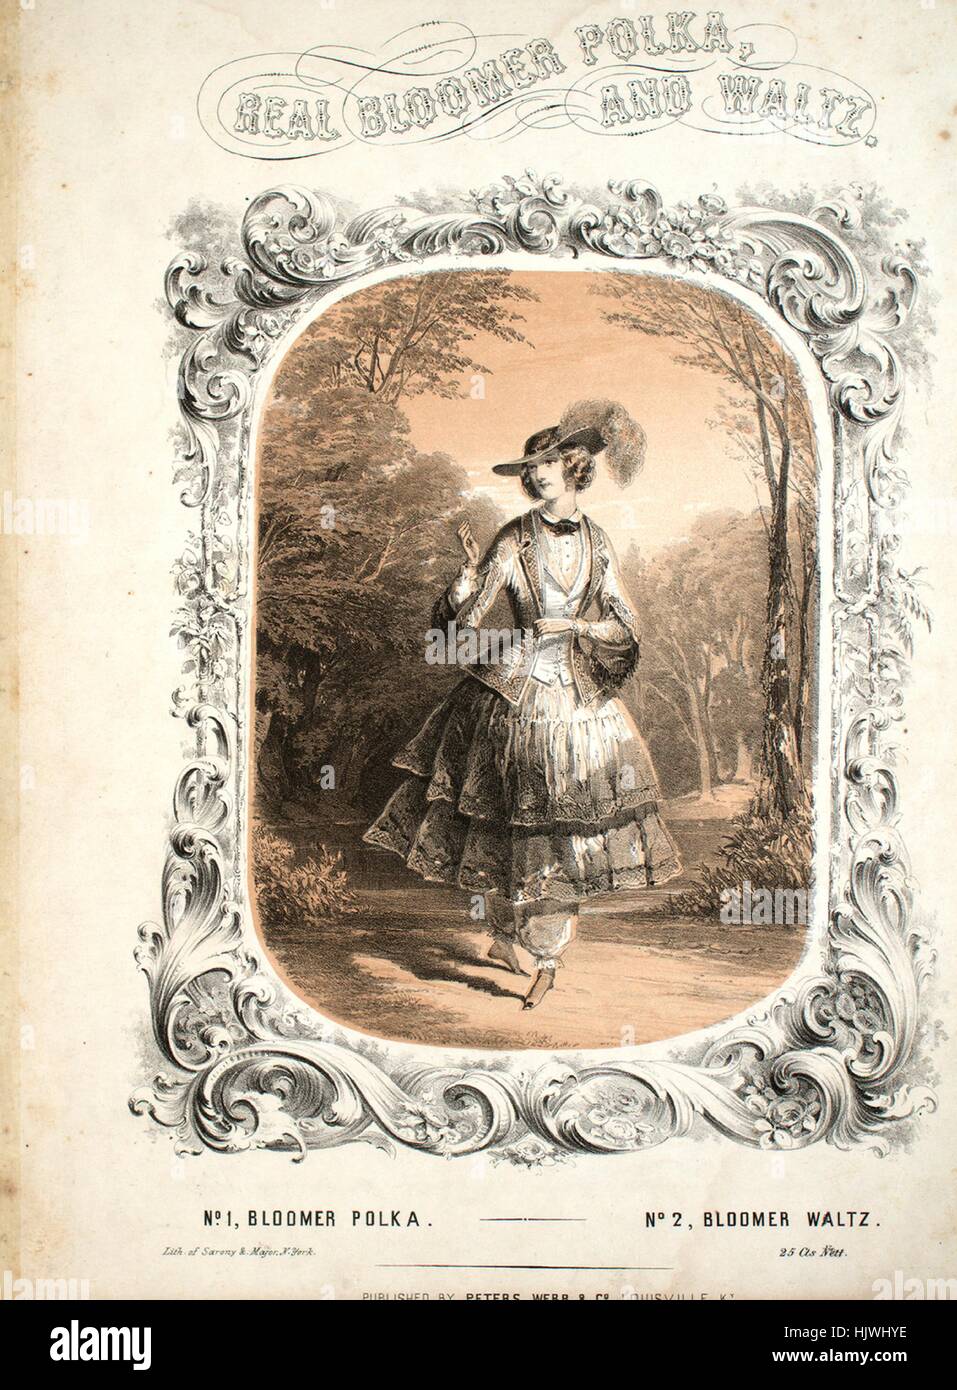 Sheet music cover image of the song 'Real Bloomer Polka', with original authorship notes reading 'Arranged by Paul Schmidt', 1852. The publisher is listed as 'Peters, Webb and Co.', the form of composition is 'sectional', the instrumentation is 'piano', the first line reads 'None', and the illustration artist is listed as 'Lith. of Sarony and Major, N.York; J. Slinglandt Engr. and Pr.'. Stock Photo